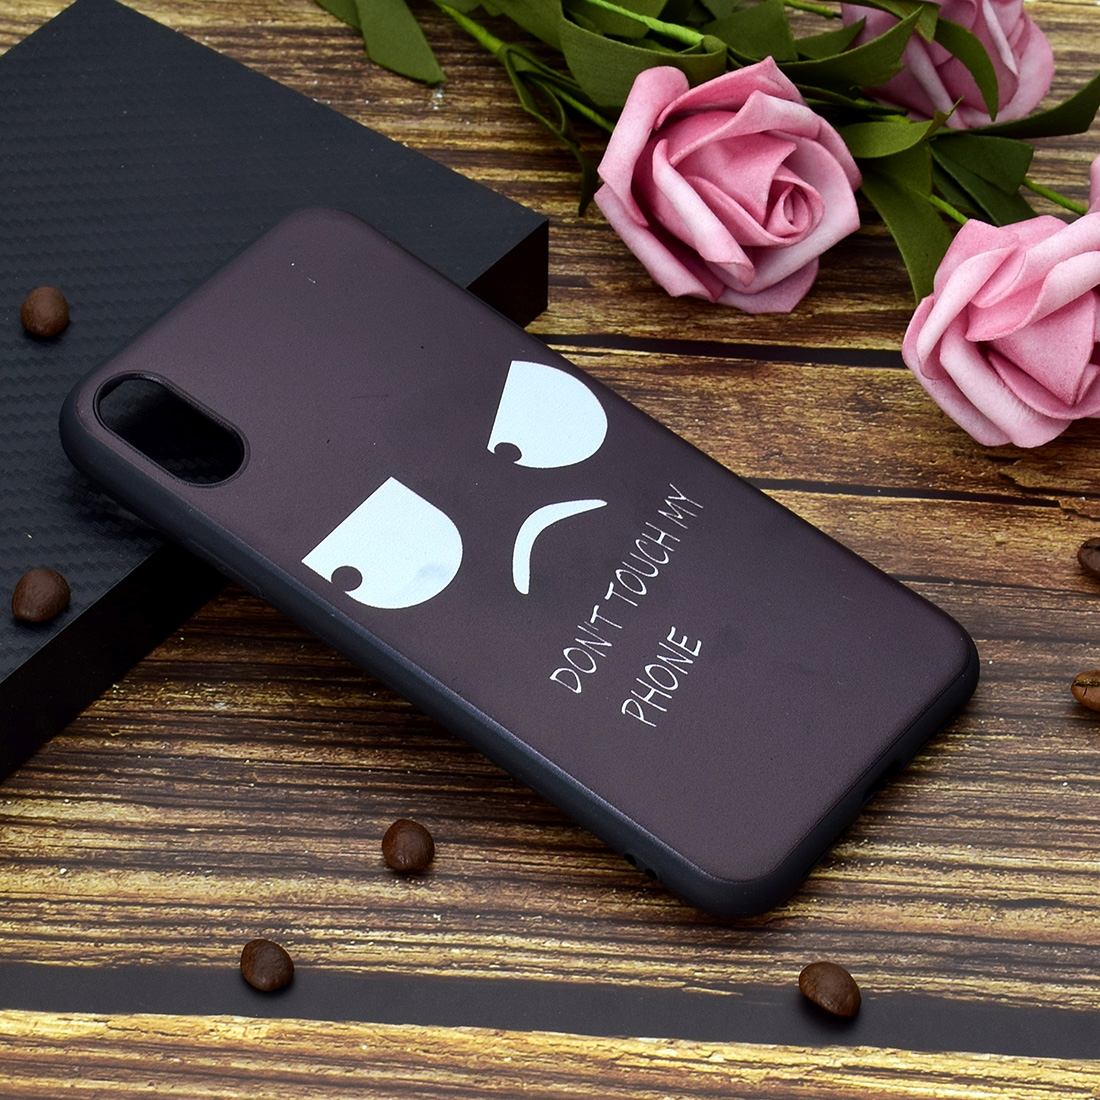 Painted Soft TPU Protective Case For iPhone XR,Angry Face